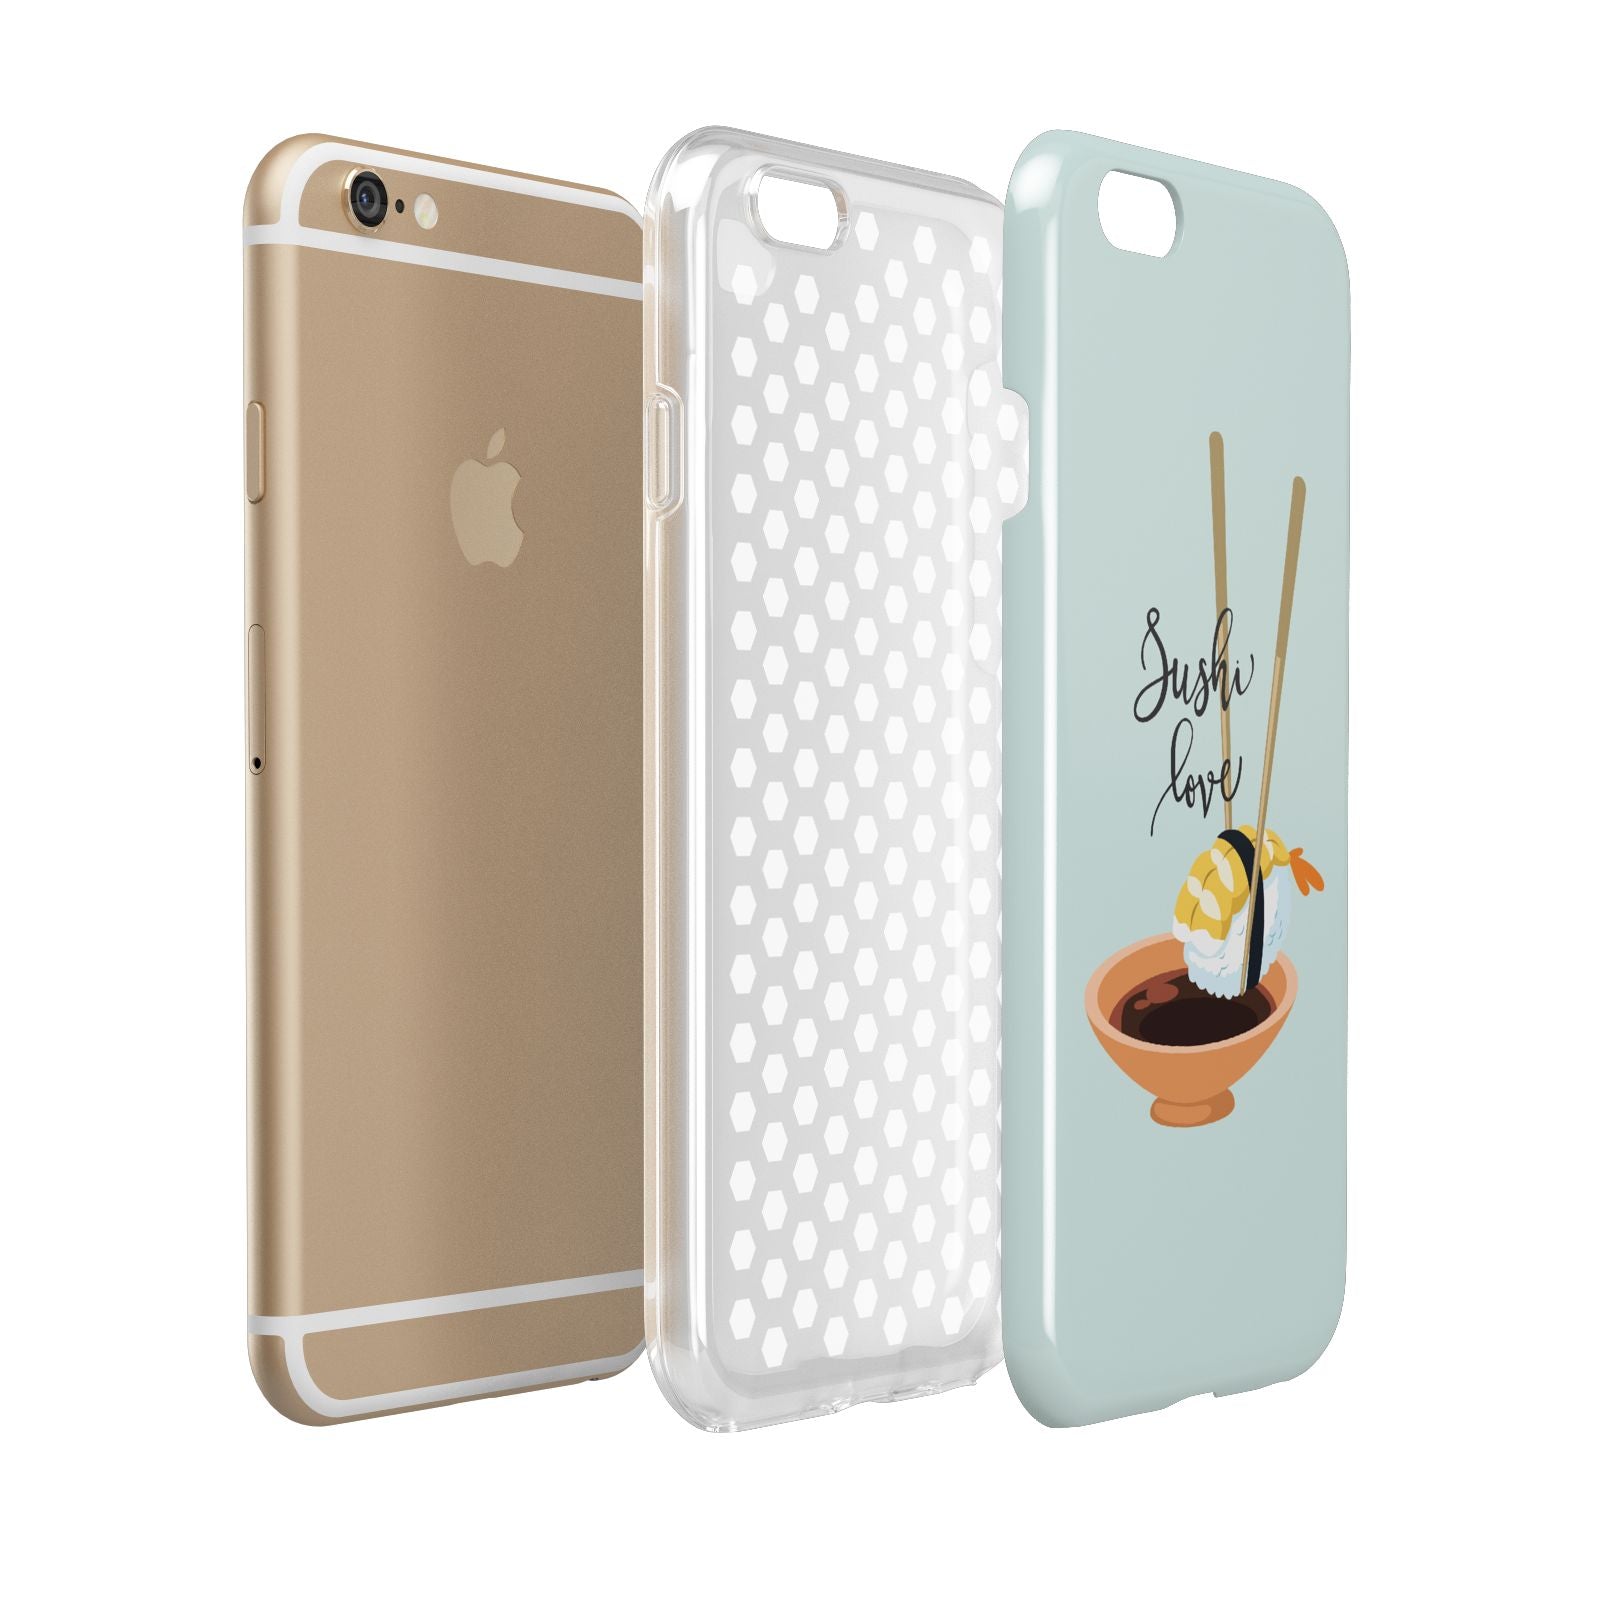 Sushi Love Apple iPhone 6 3D Tough Case Expanded view